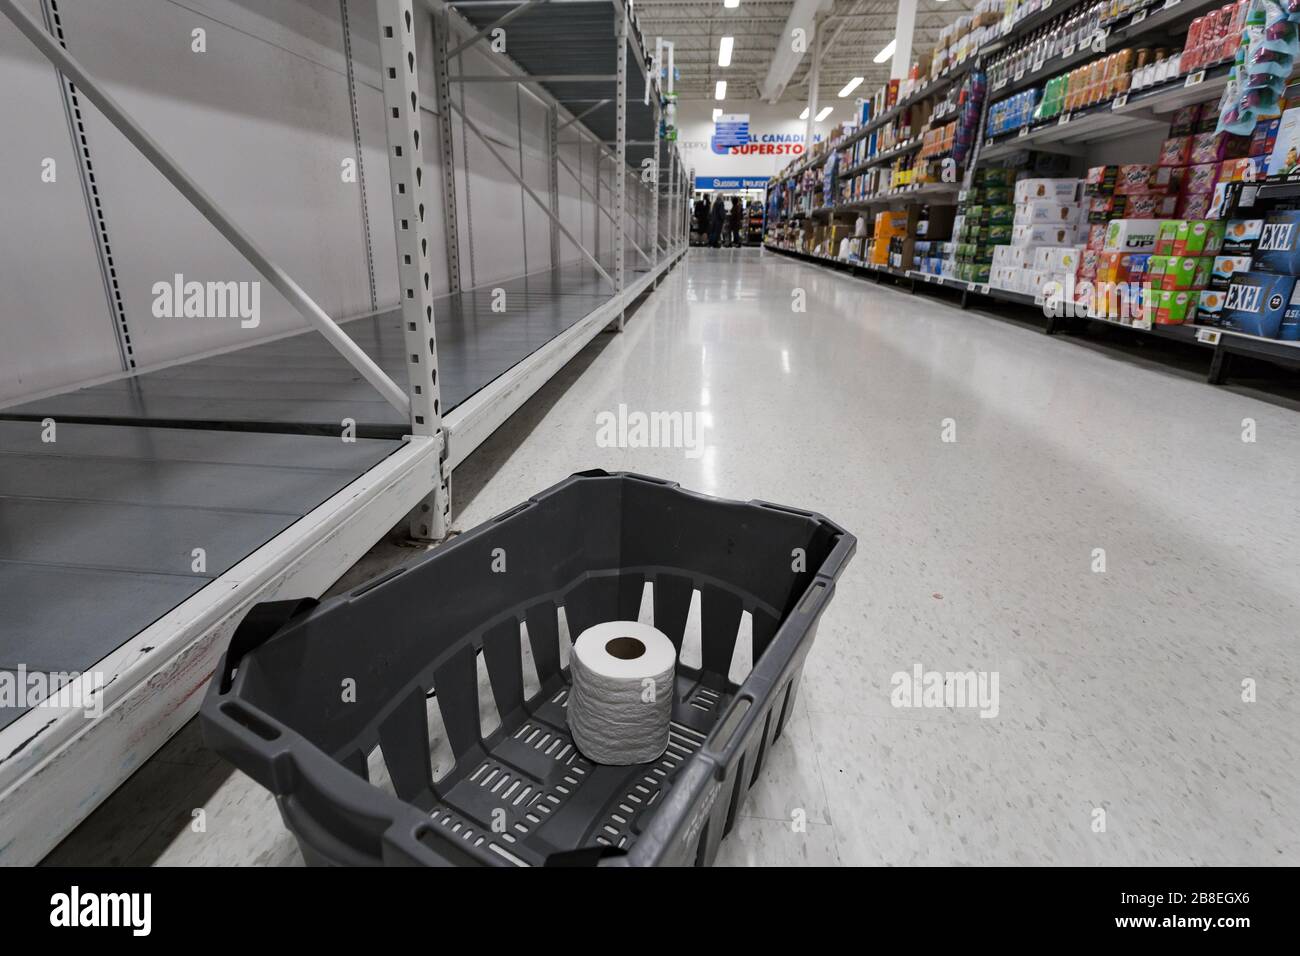 NORTH VANCOUVER, BC, CANADA - MAR 19, 2020: An empty shelf with a single roll of toilet paper in a shopping basket at a supermarket as panic buying Stock Photo